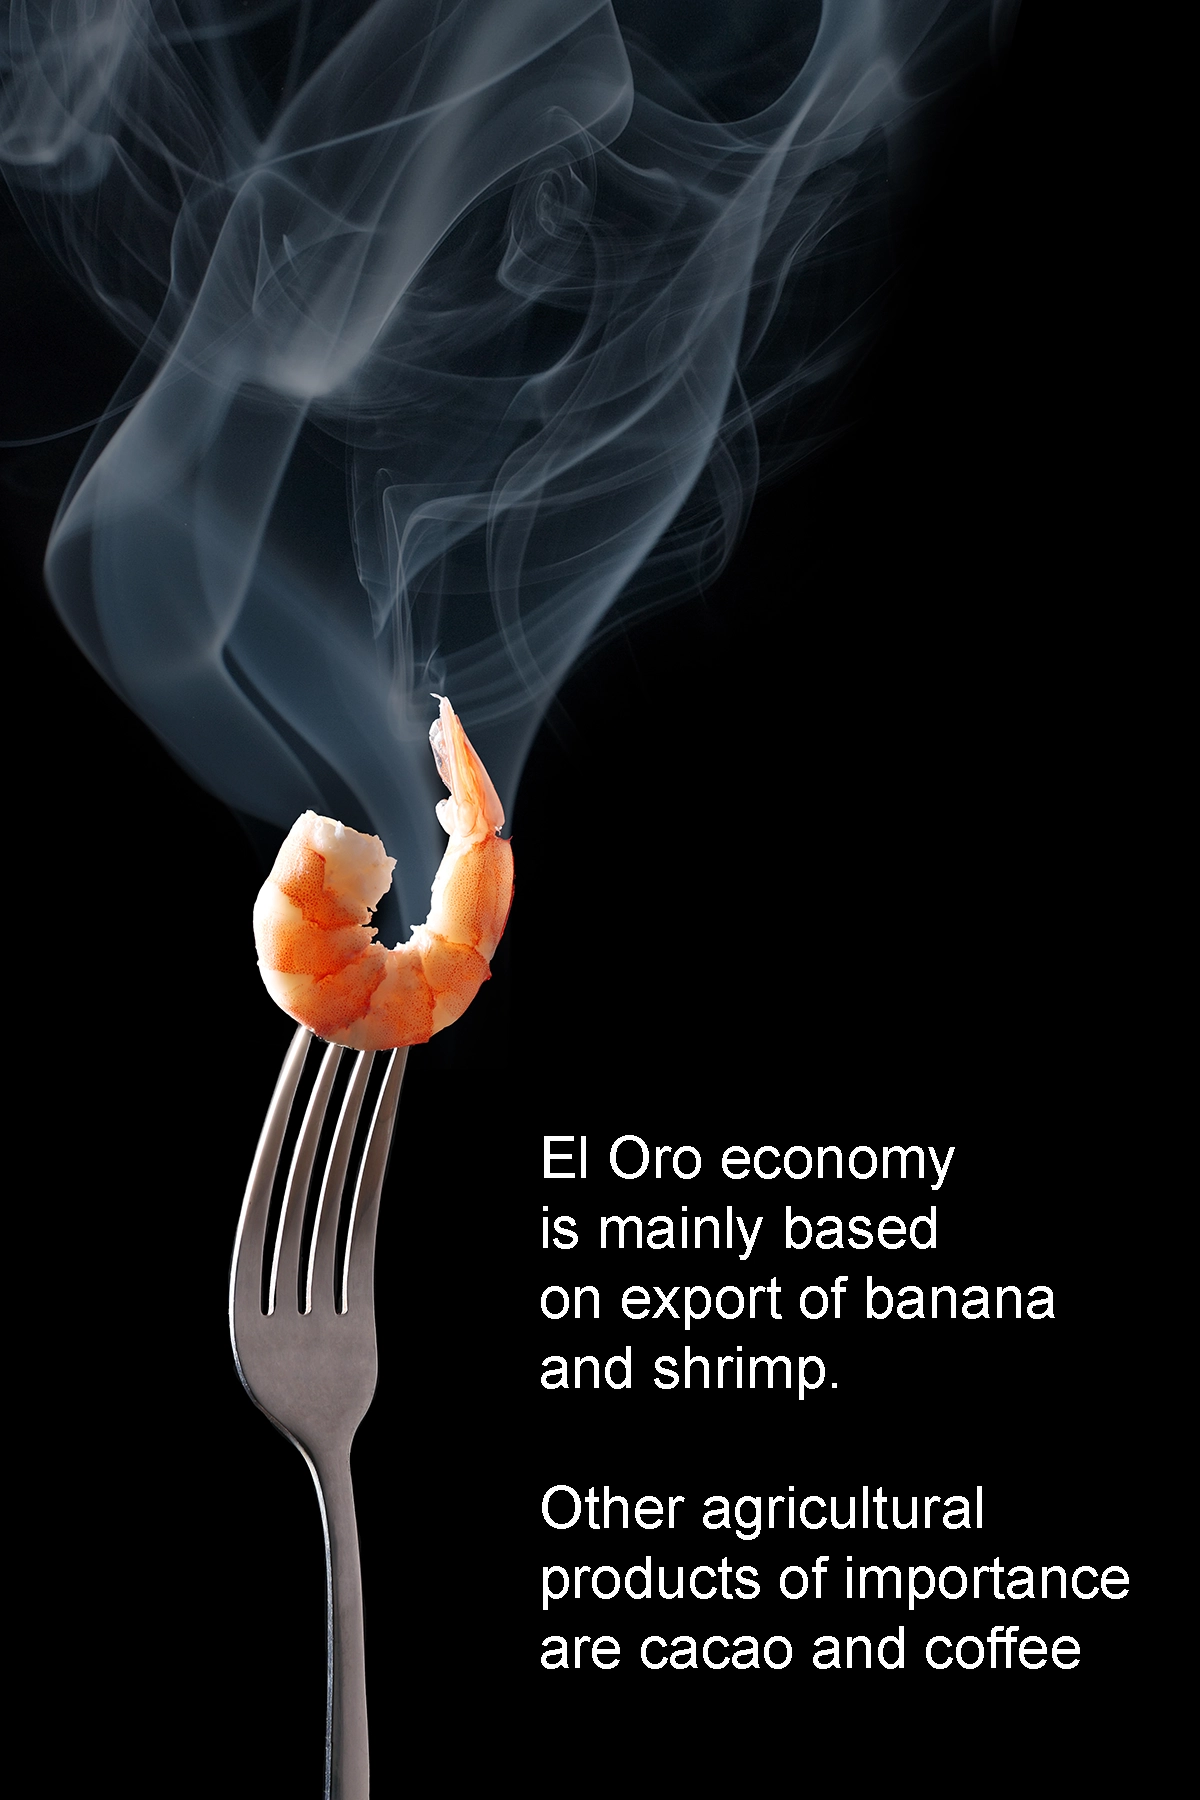 Tantalizing photo of cooked king and tiger shrimp on silver fork. Delightful seafood from El Oro Province, Ecuador.